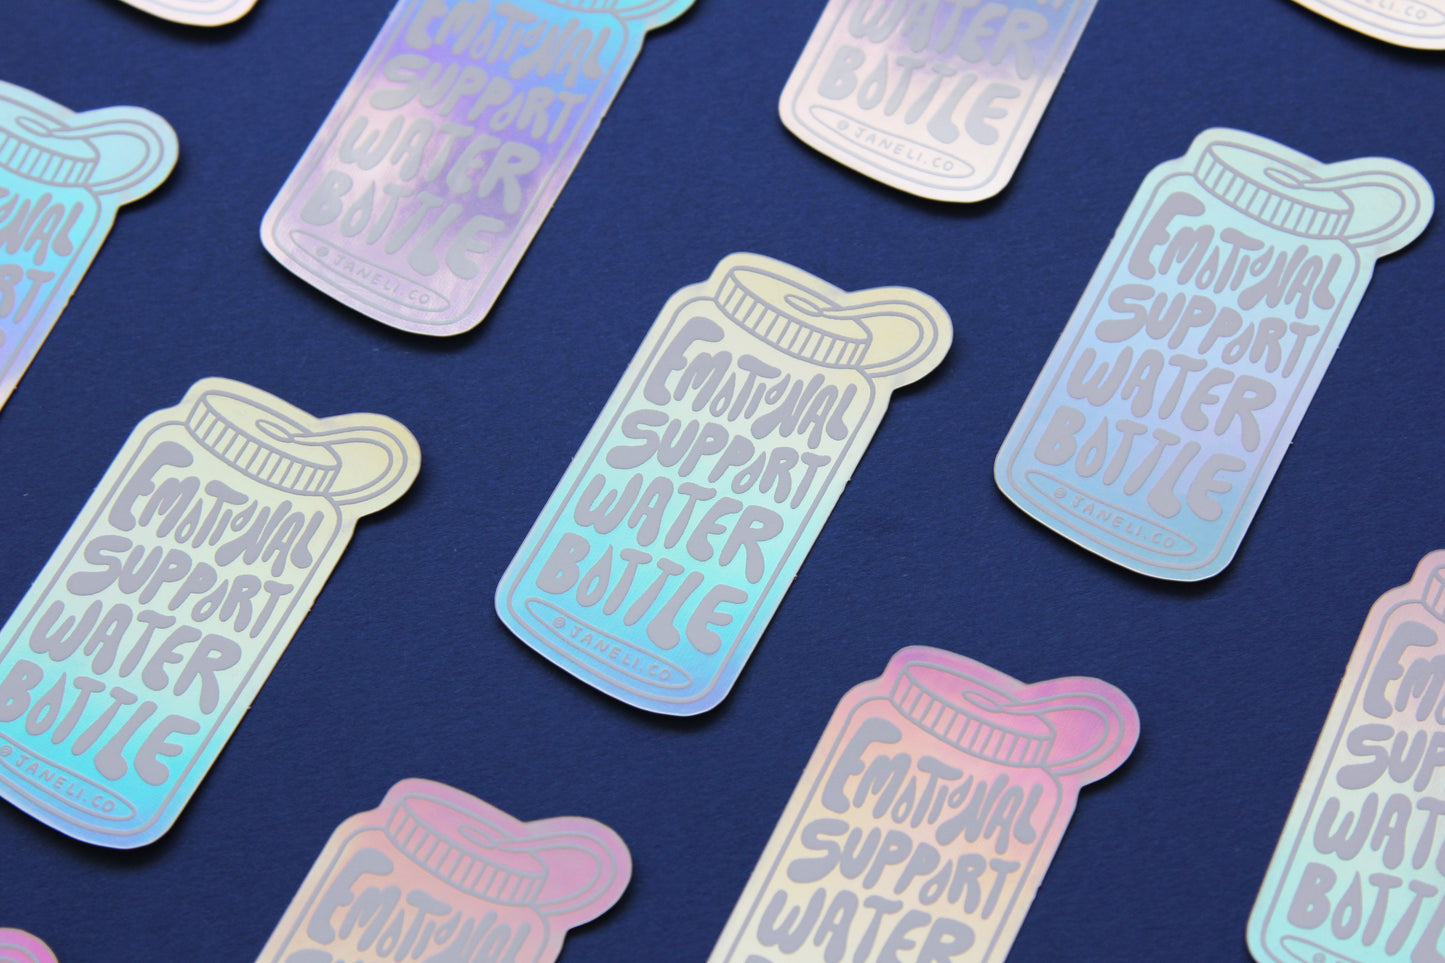 A grid of holographic JaneLi.Co stickers that say "Emotional Support Water Bottle" in the shape of a water bottle over a navy blue background.